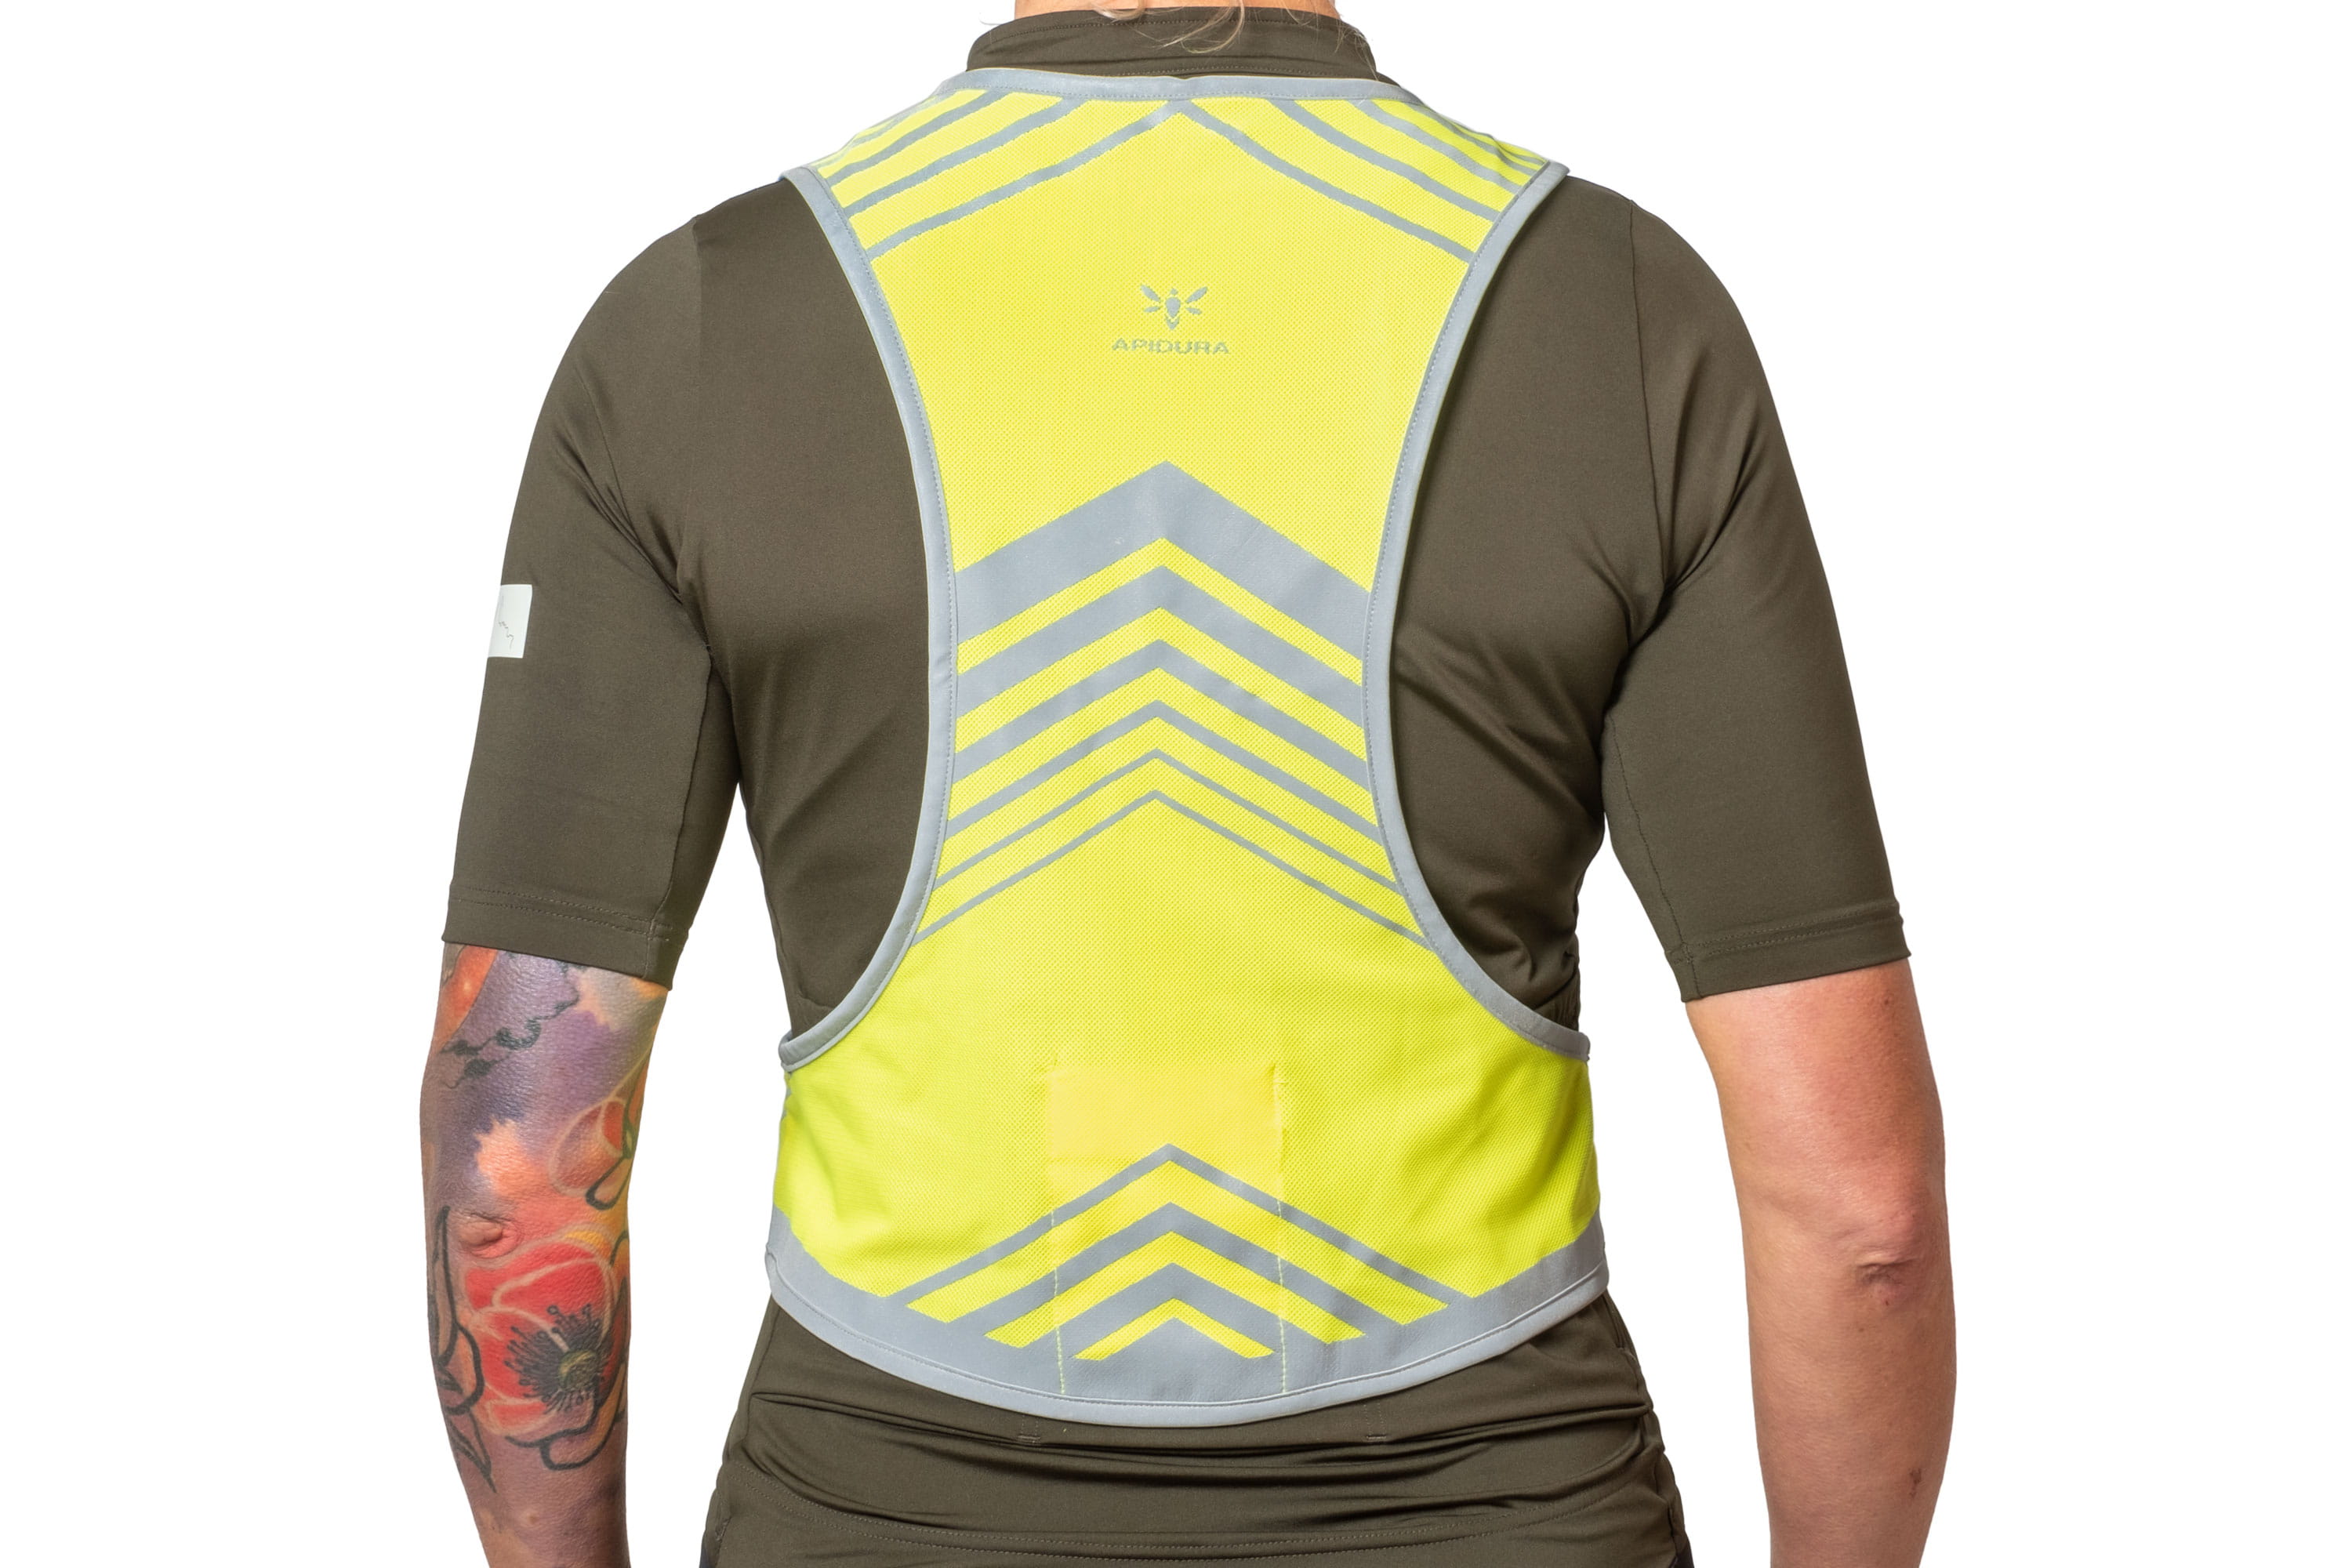 https://bike-packing.imgbolt.de/media/3b/a6/37/1701075232/apidura-packable-visibility-vest-s-m-on-body-5-hires.jpg